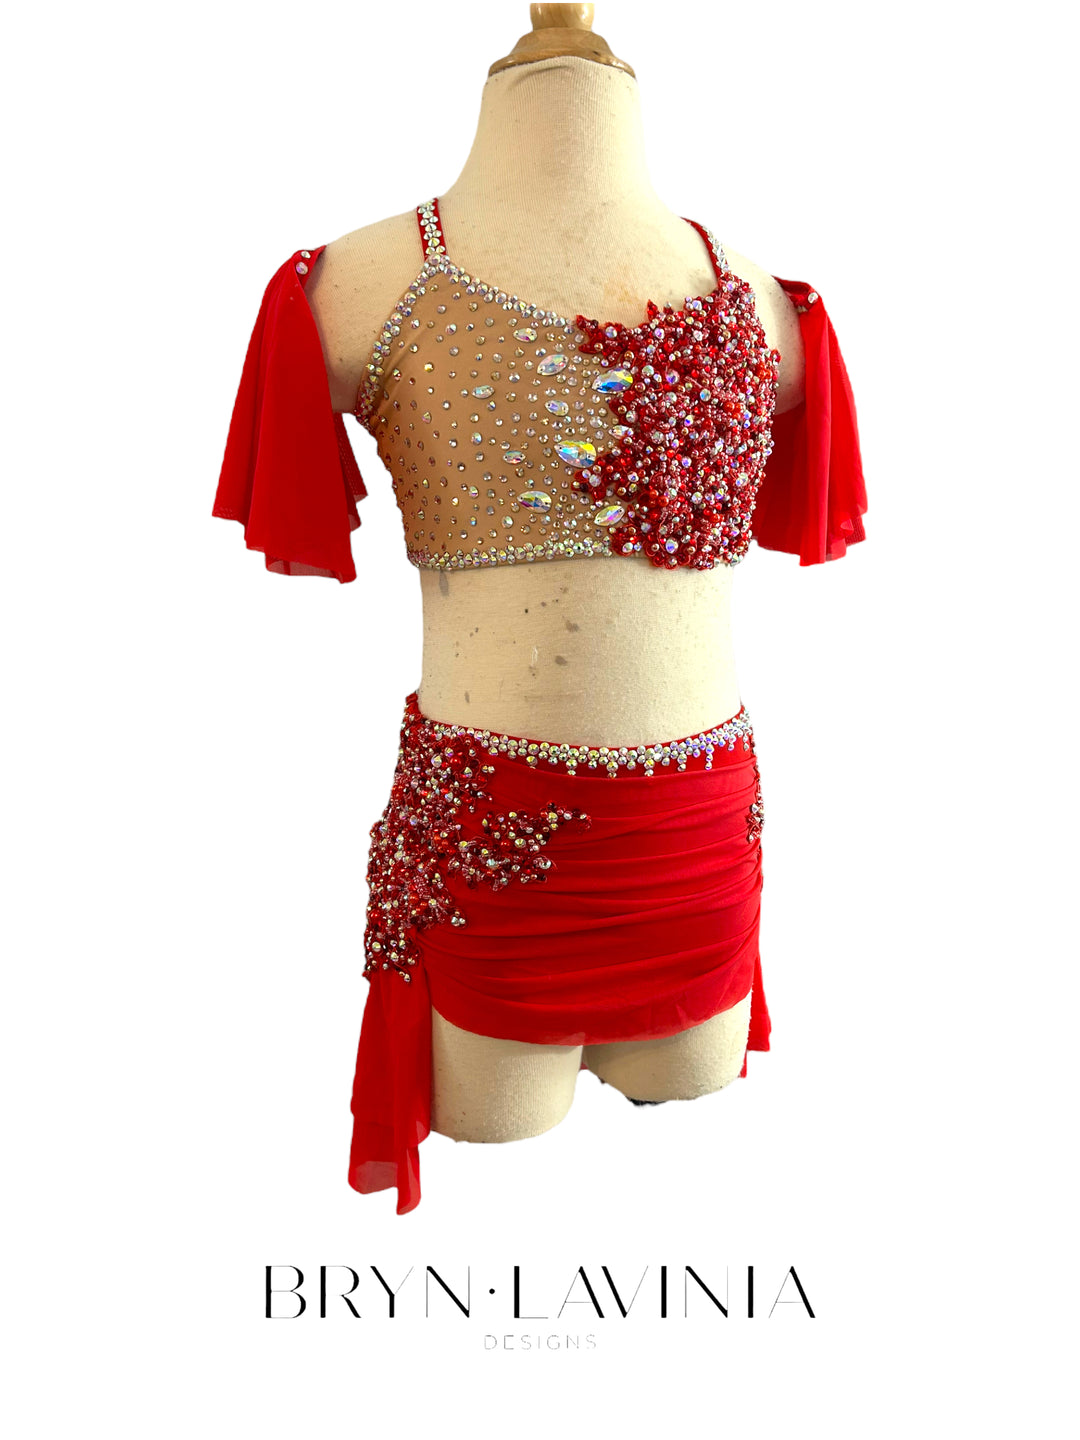 NEW CL red/nude ready to ship costume